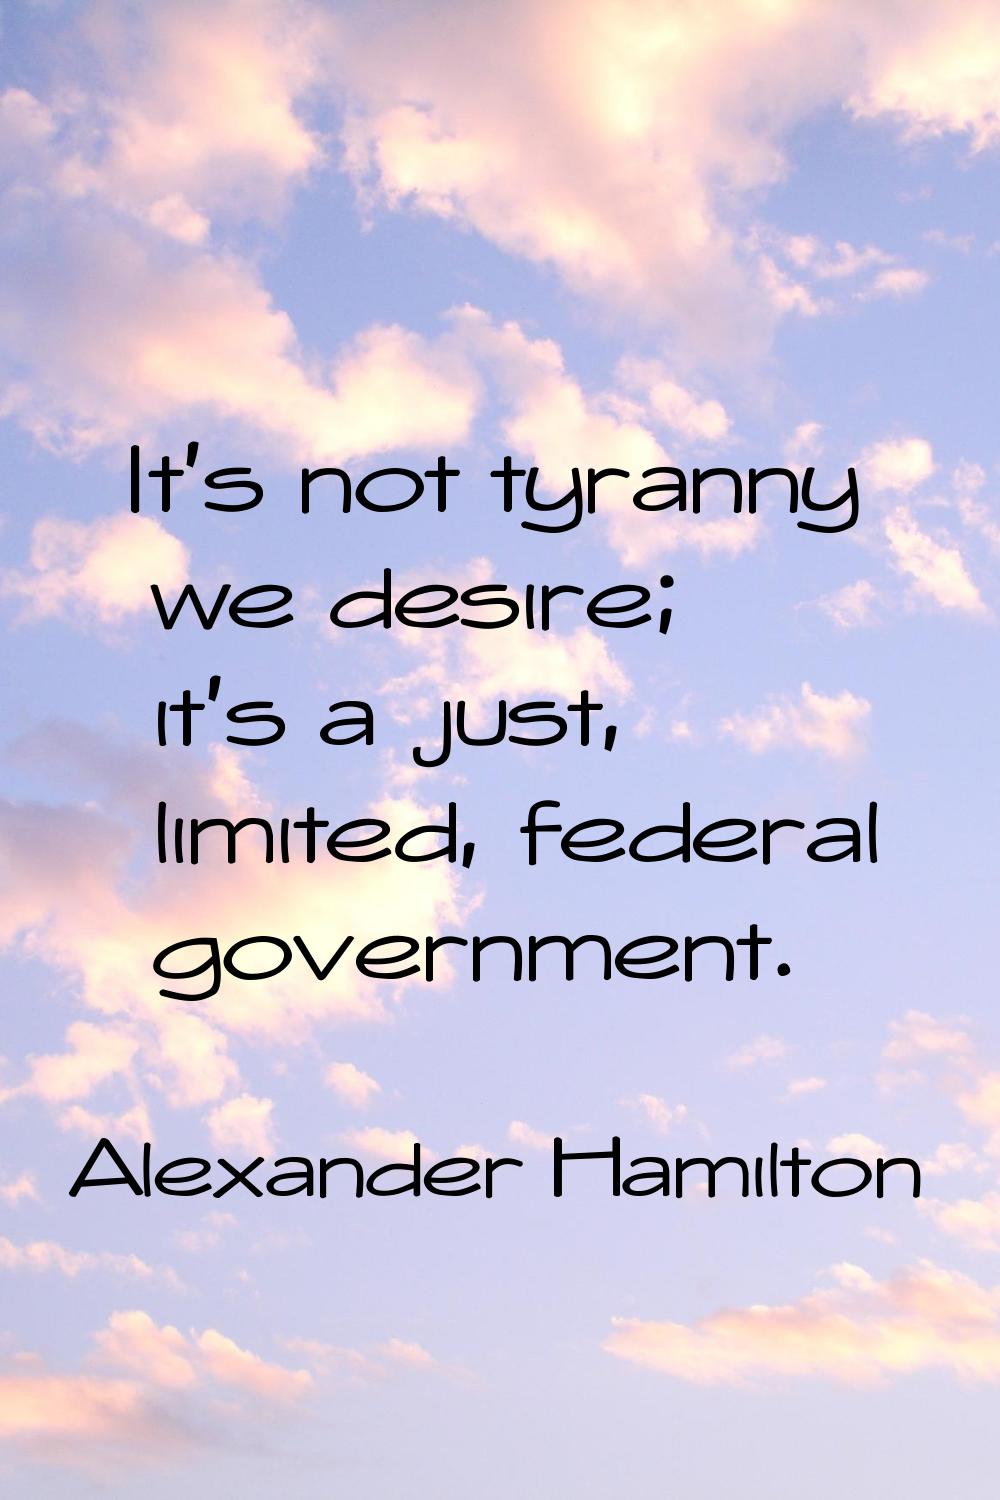 It's not tyranny we desire; it's a just, limited, federal government.